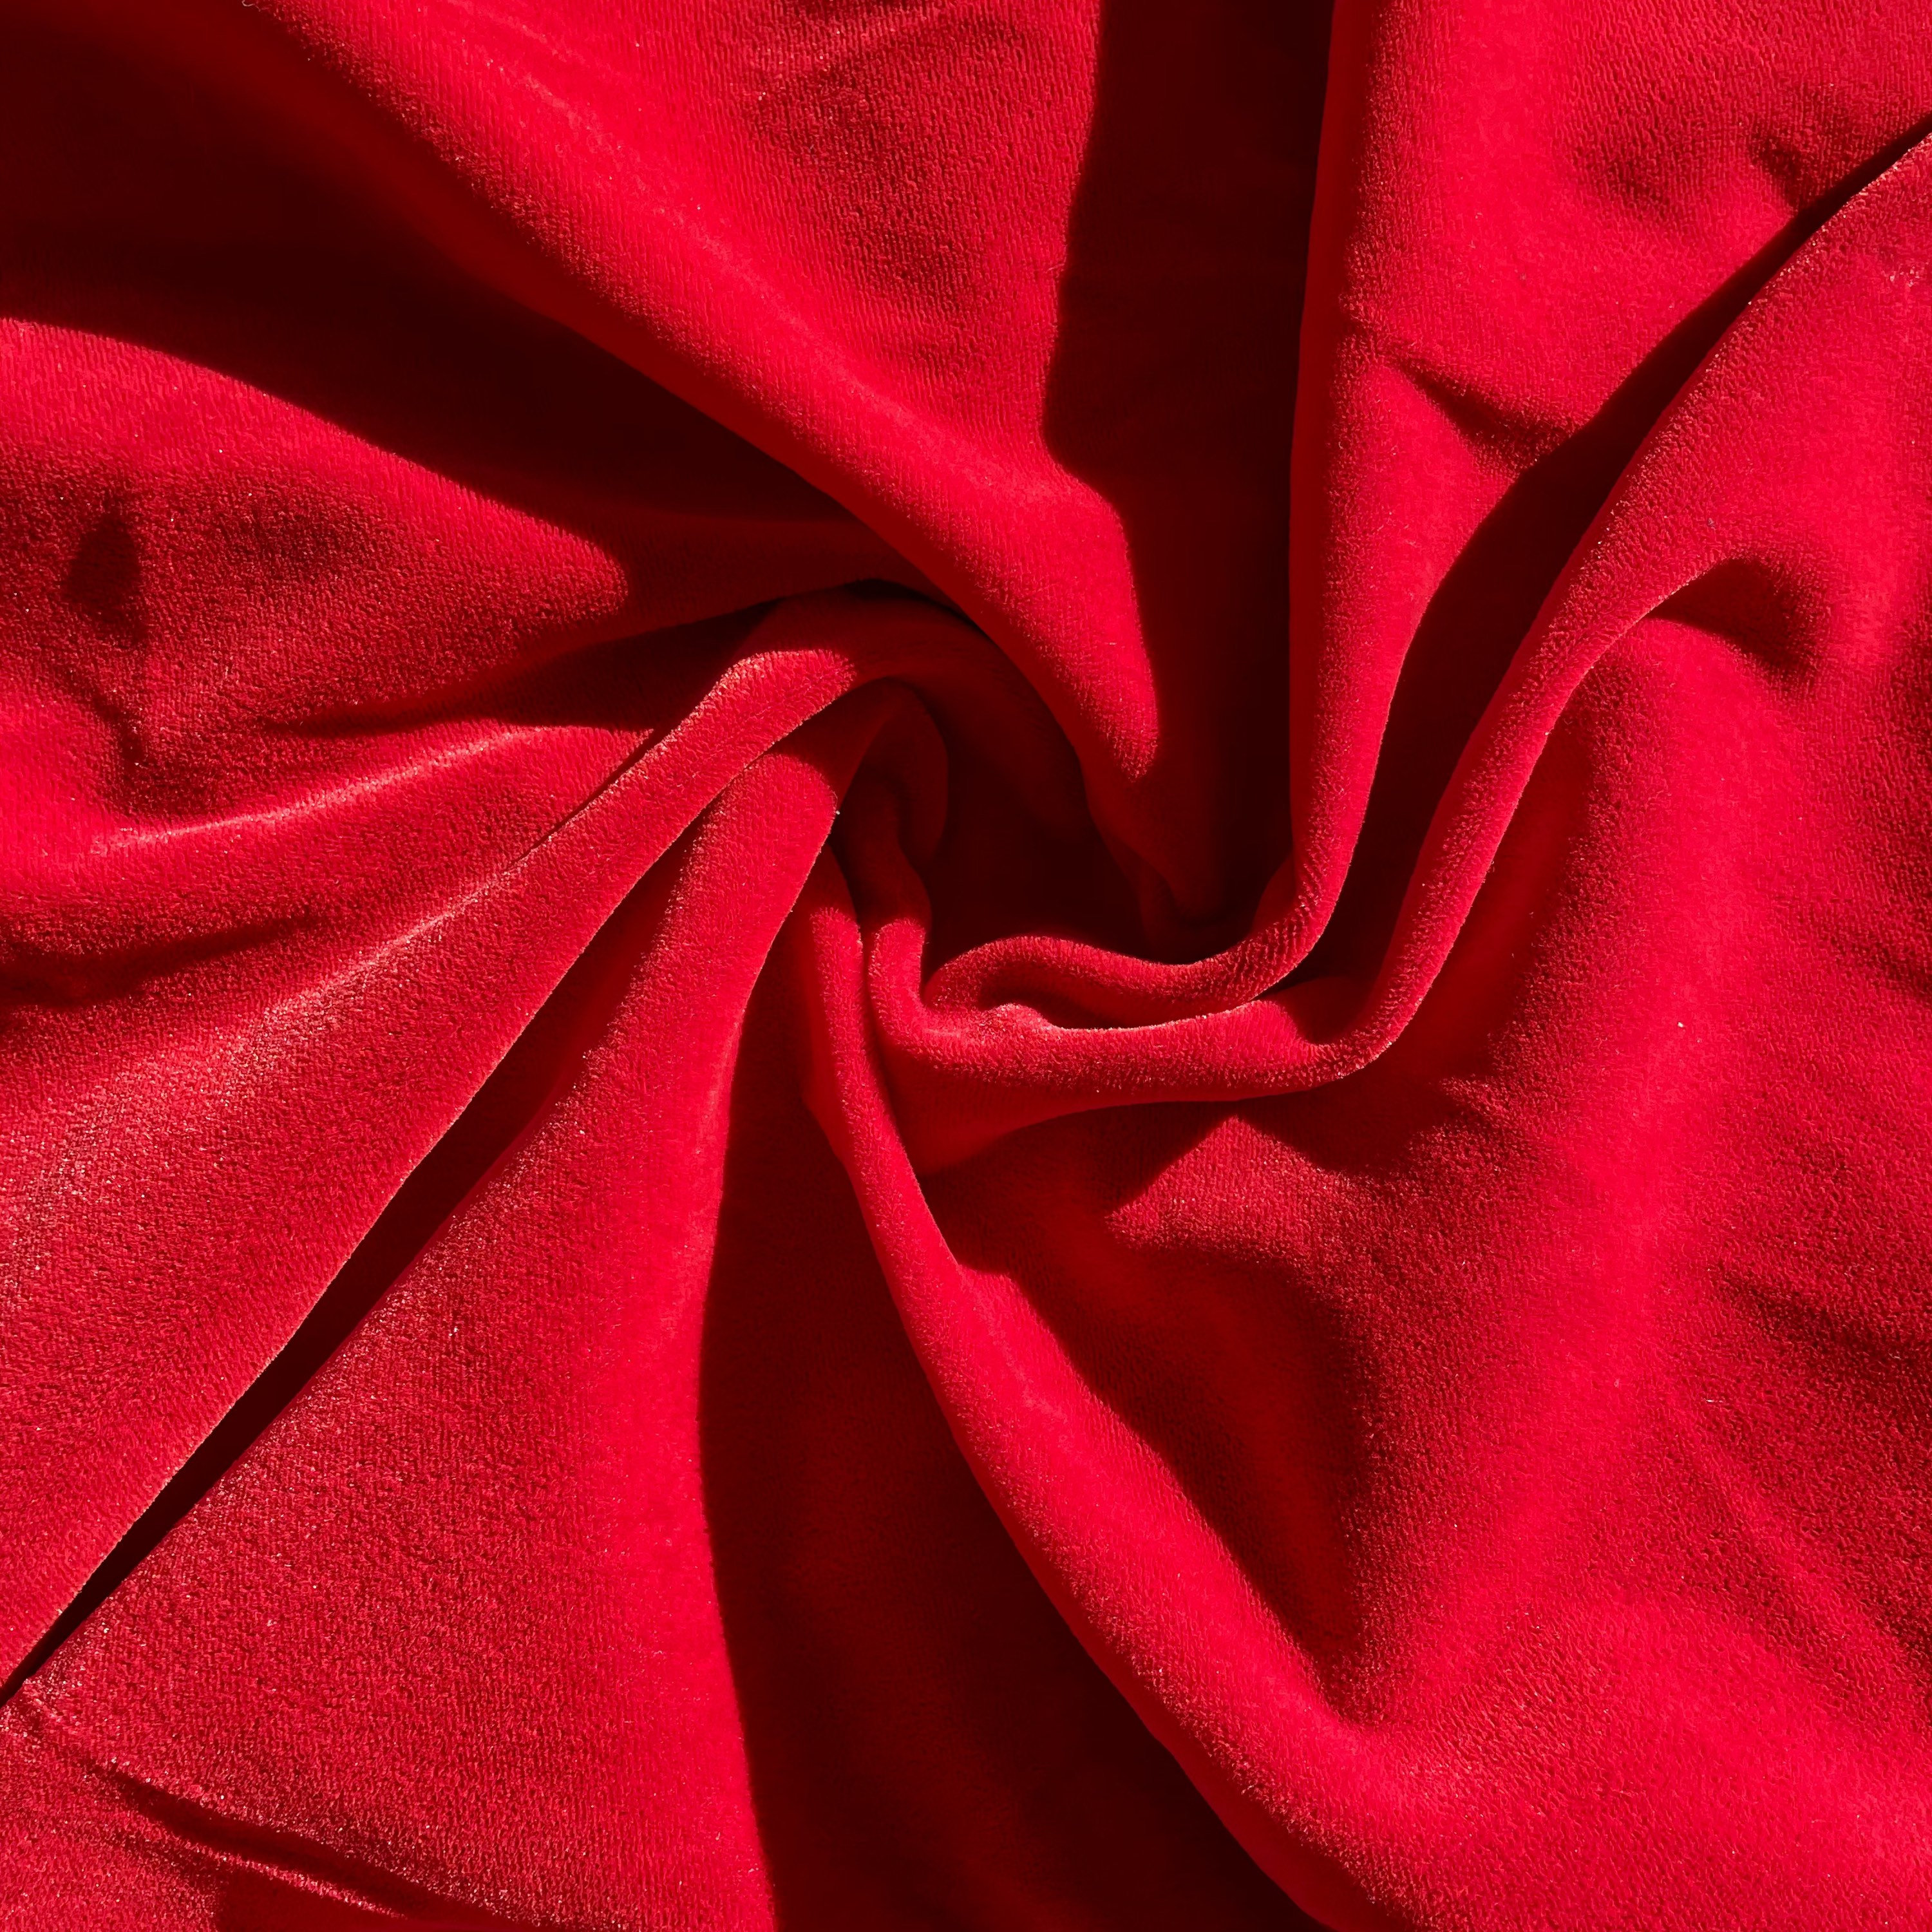 Dark Red Velvet Fabric by the Yard, Lux Red Velour Fabric With Stretch,  Wine Color Velvet Material, Red Crushed Velvet for Dress Skirt Top 